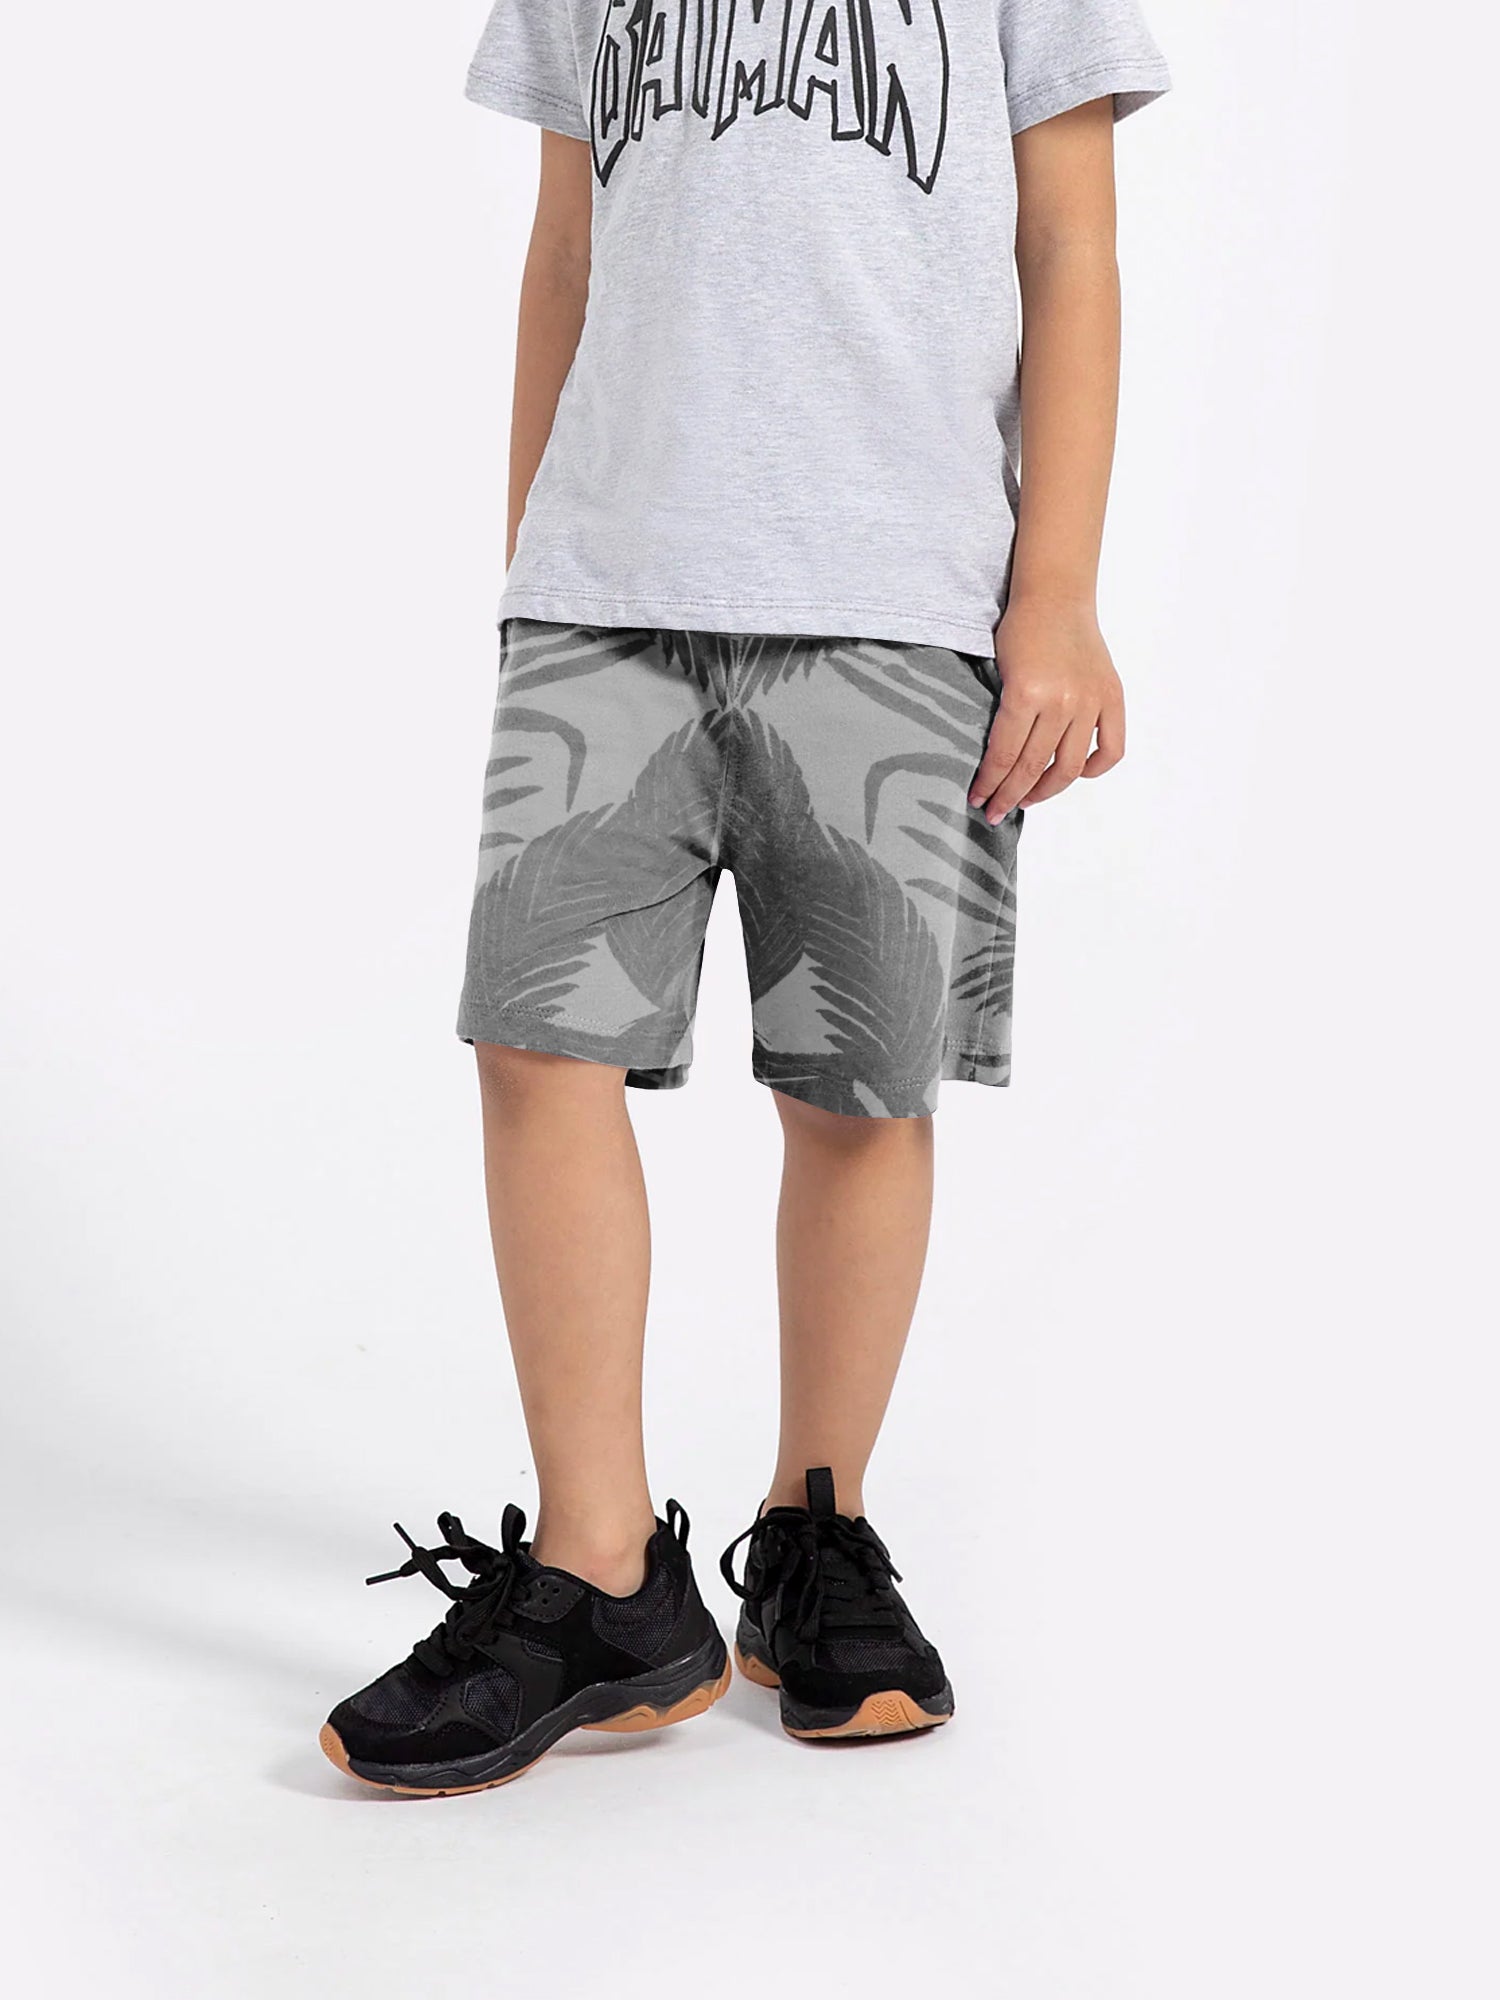 Next Terry Fleece Short For Kids-Grey With Allover Print-SP1378